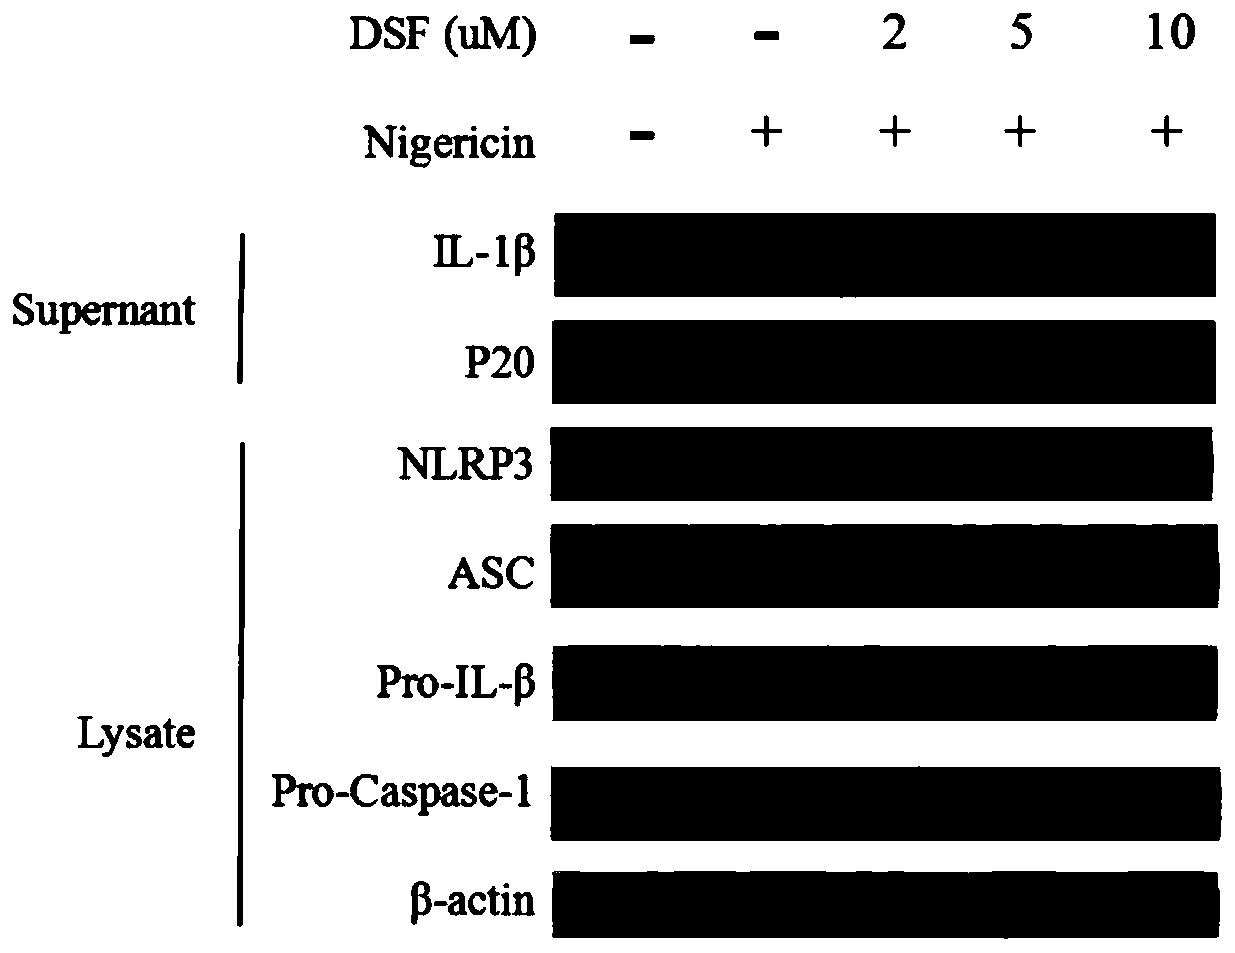 Application of disulfiram in preparing drugs for preventing and treating diseases related to NLRP3 inflammasome